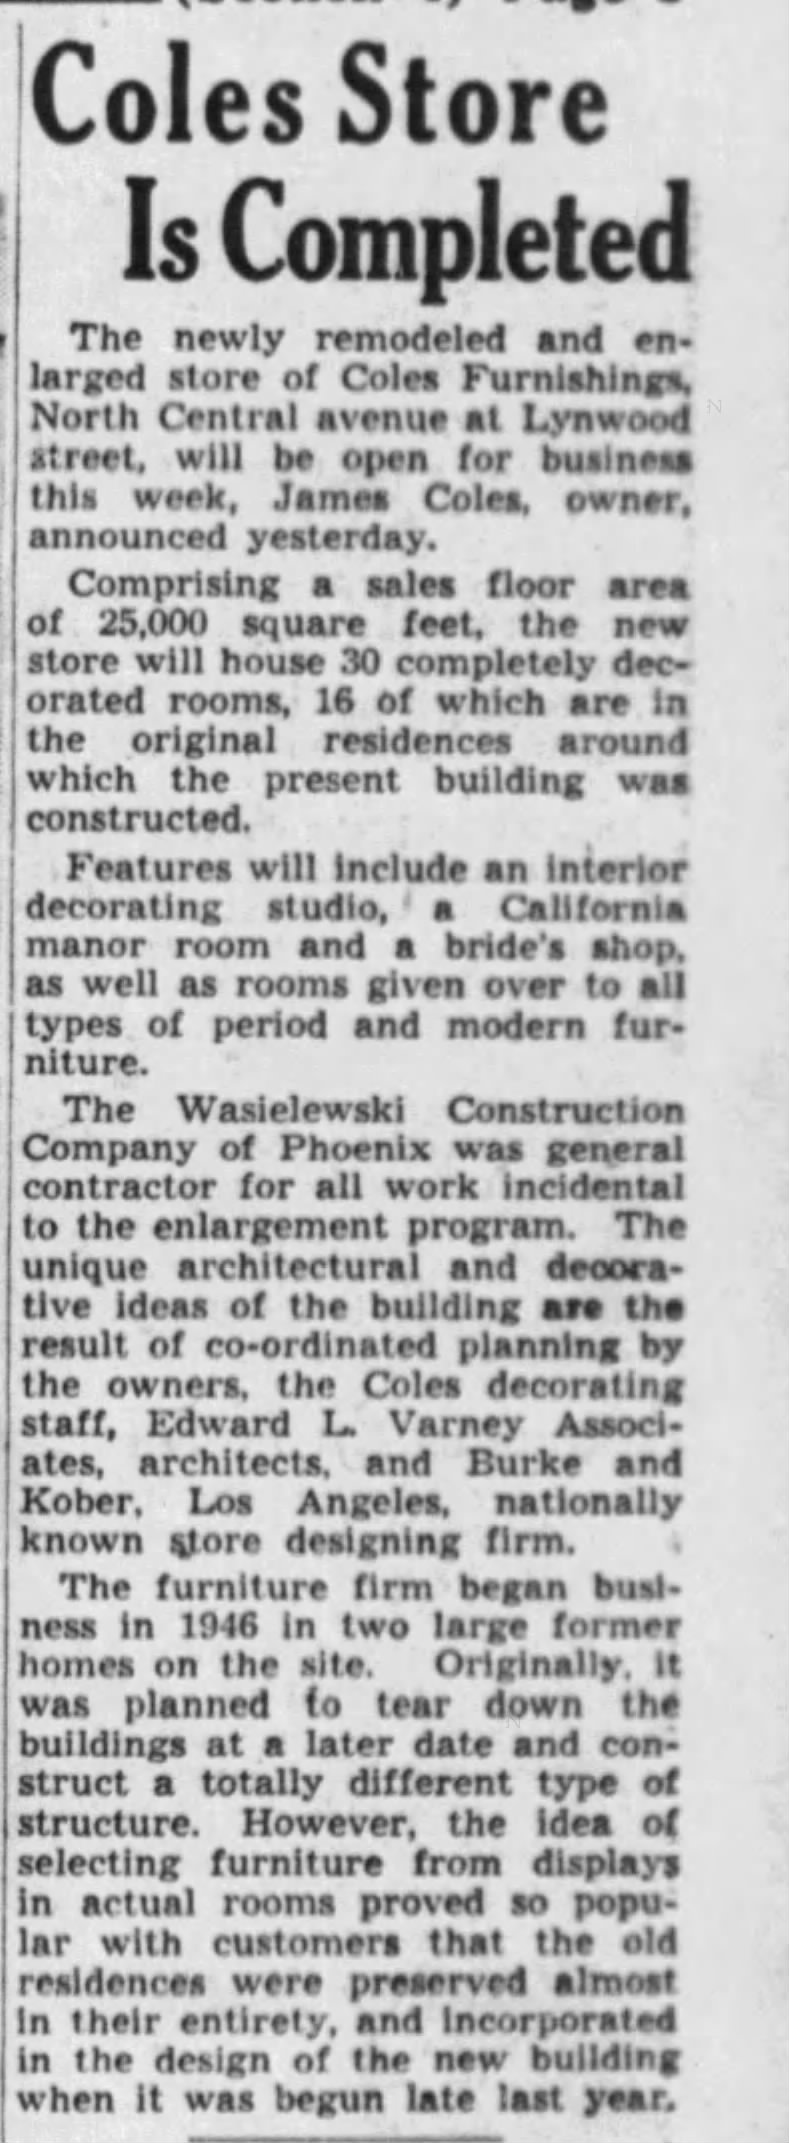 1948: Coles Furnishings Remodeled - Central Ave and Lynwood St